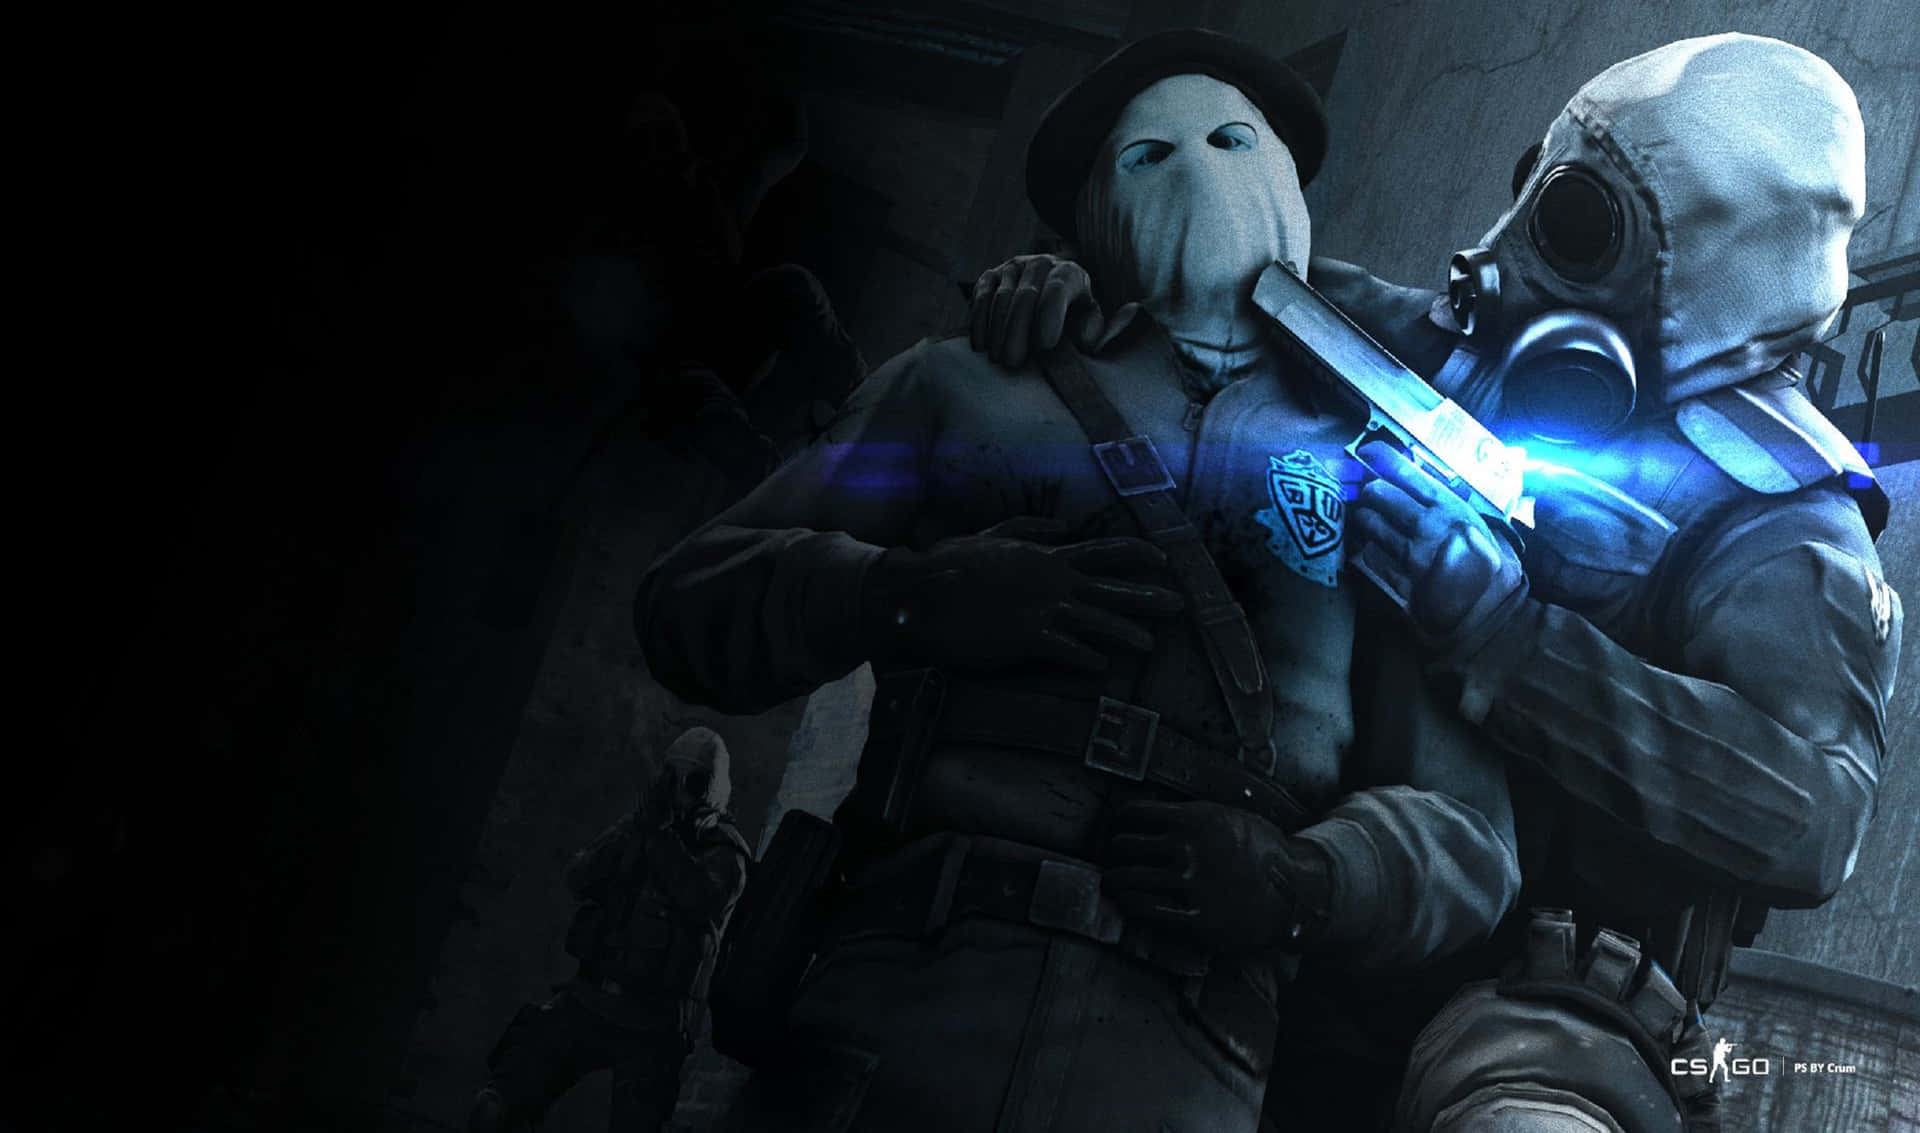 Enjoy an exciting game of Counter-Strike Global Offensive in stunning 2440x1440 resolution